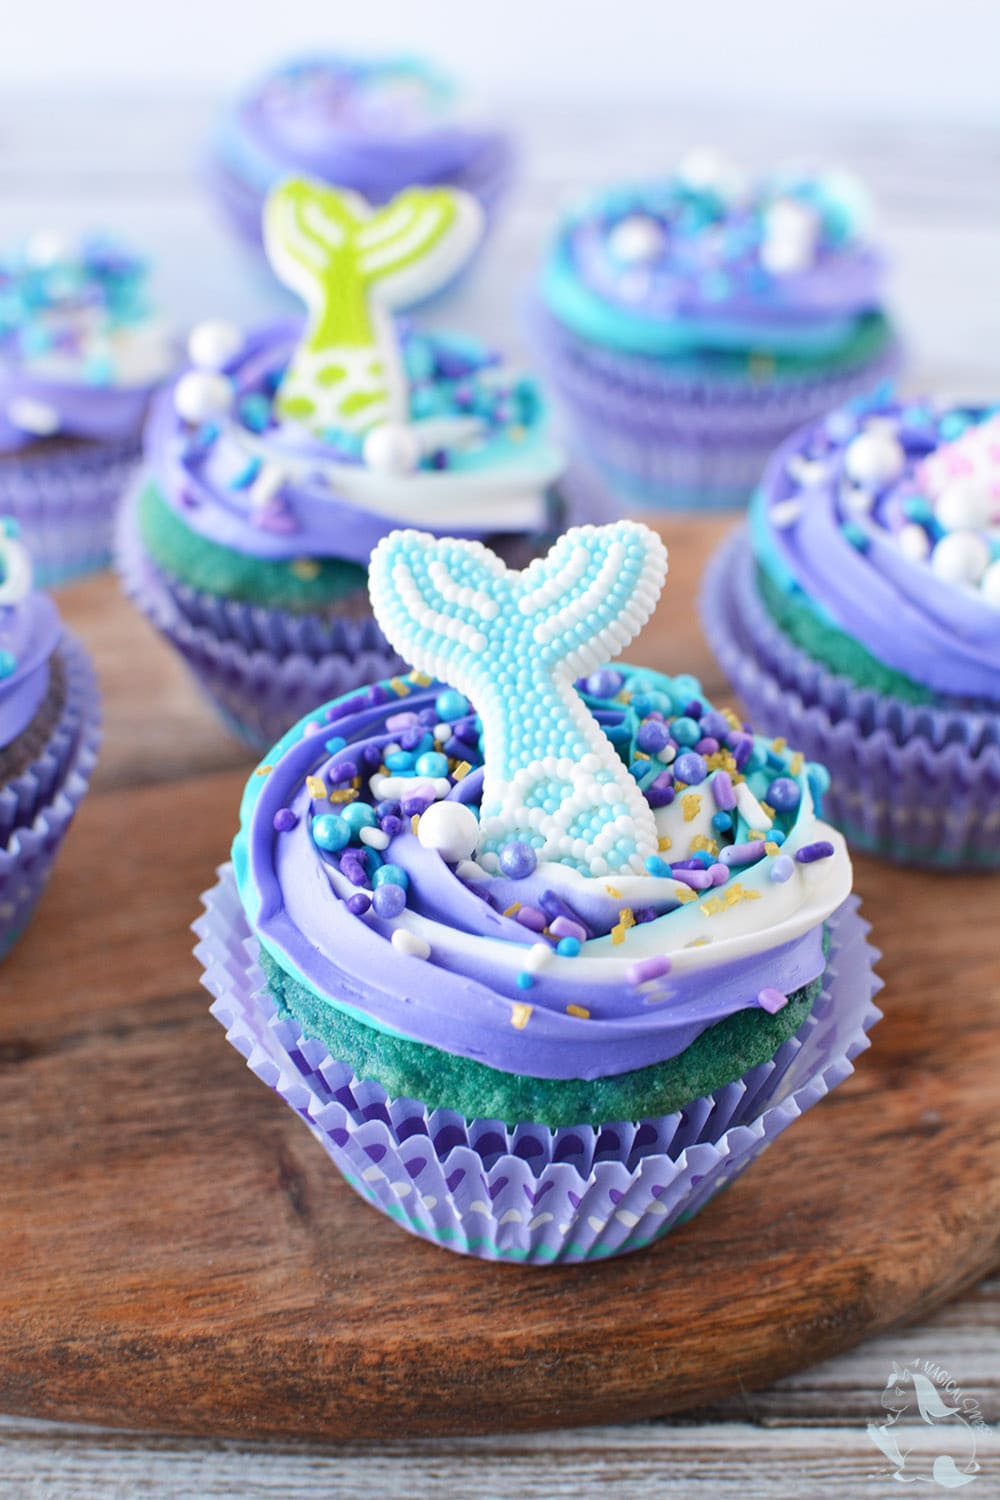 Mermaid cupcake sitting on a board with more cupcakes in the background.